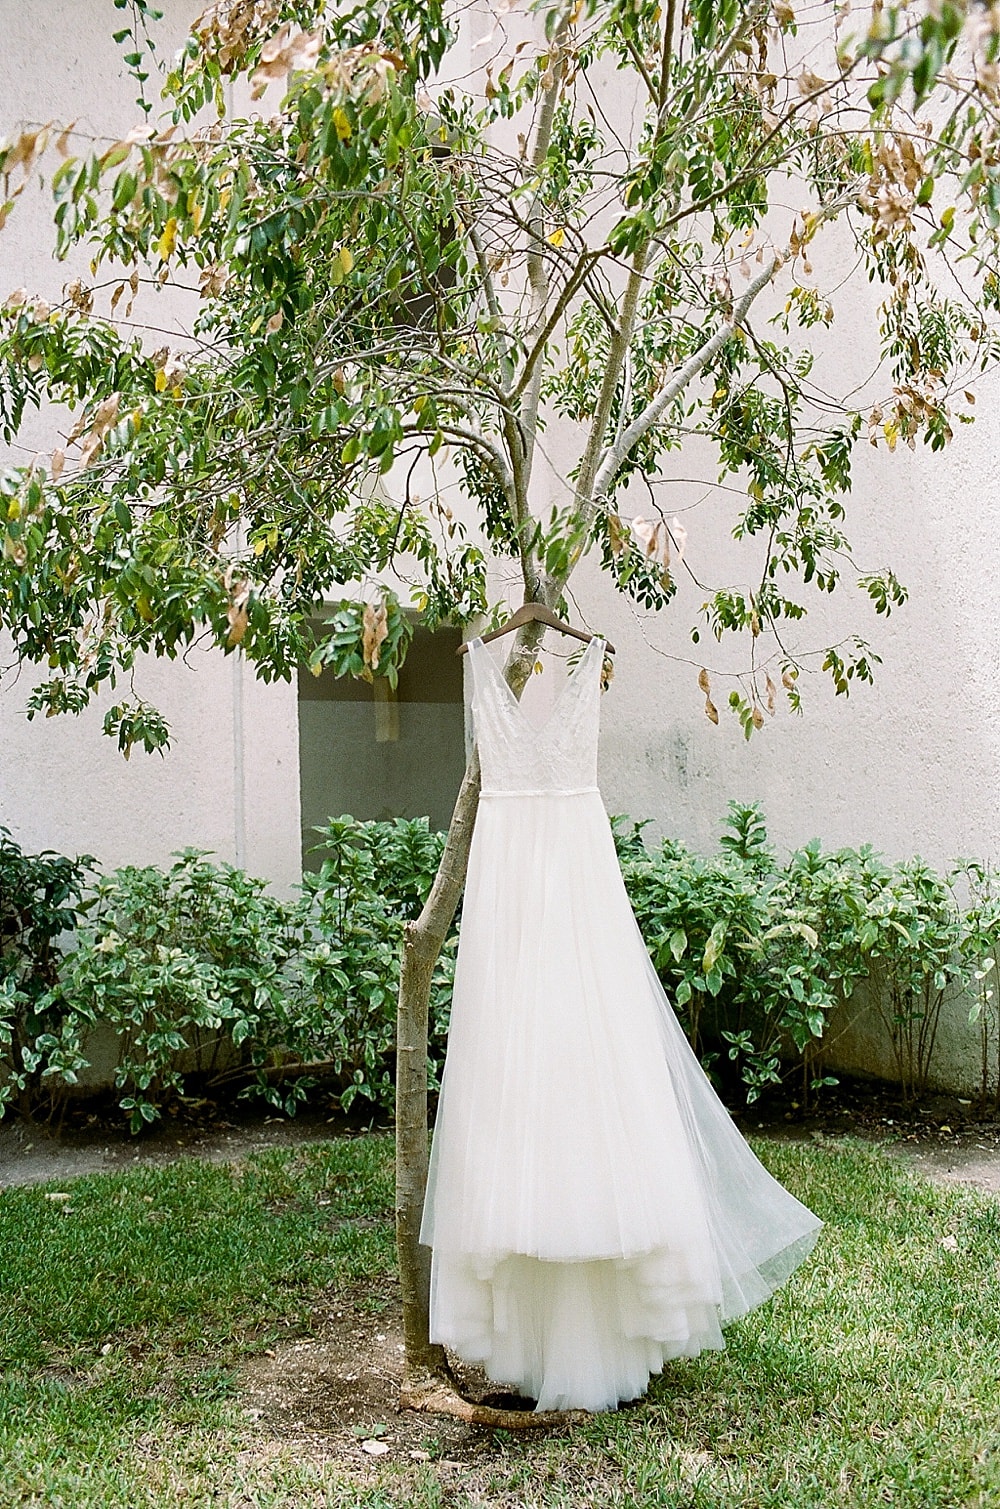 A Simple Wedding in Mexico on Cottage Hill2.jpg